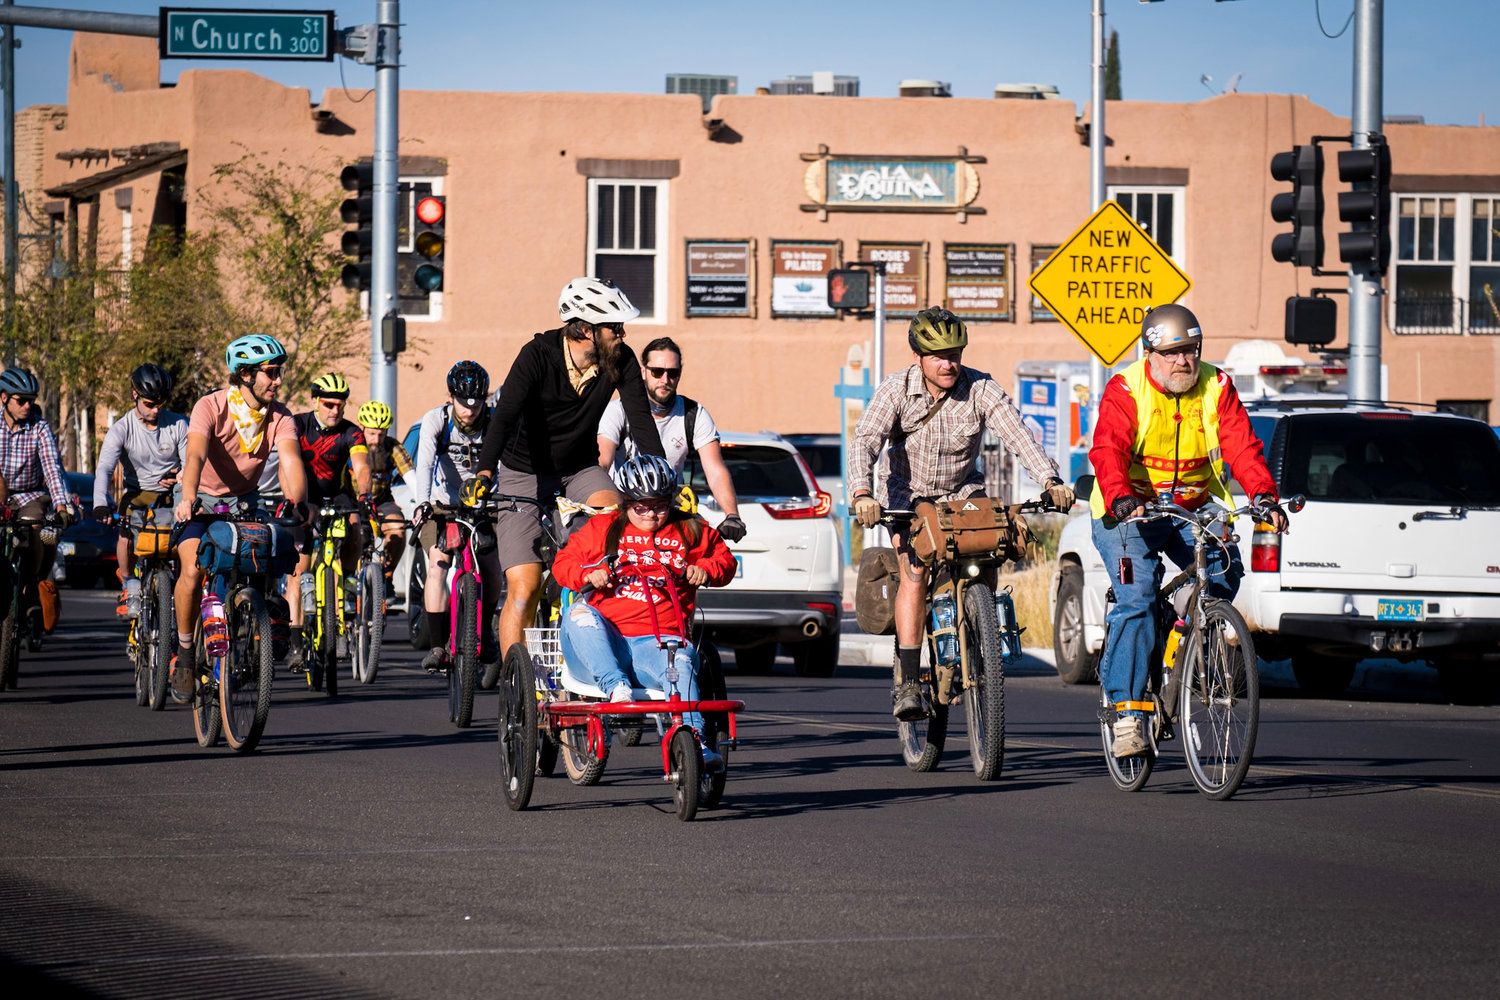 Grace Holguin and her adaptive cycle at the October 2021 New Mexico Bikepacking Summit, where she led the Dangerbird Grand Depart. At far right is Velo Cruces Board President and Las Cruces bicycling advocate George Pearson.